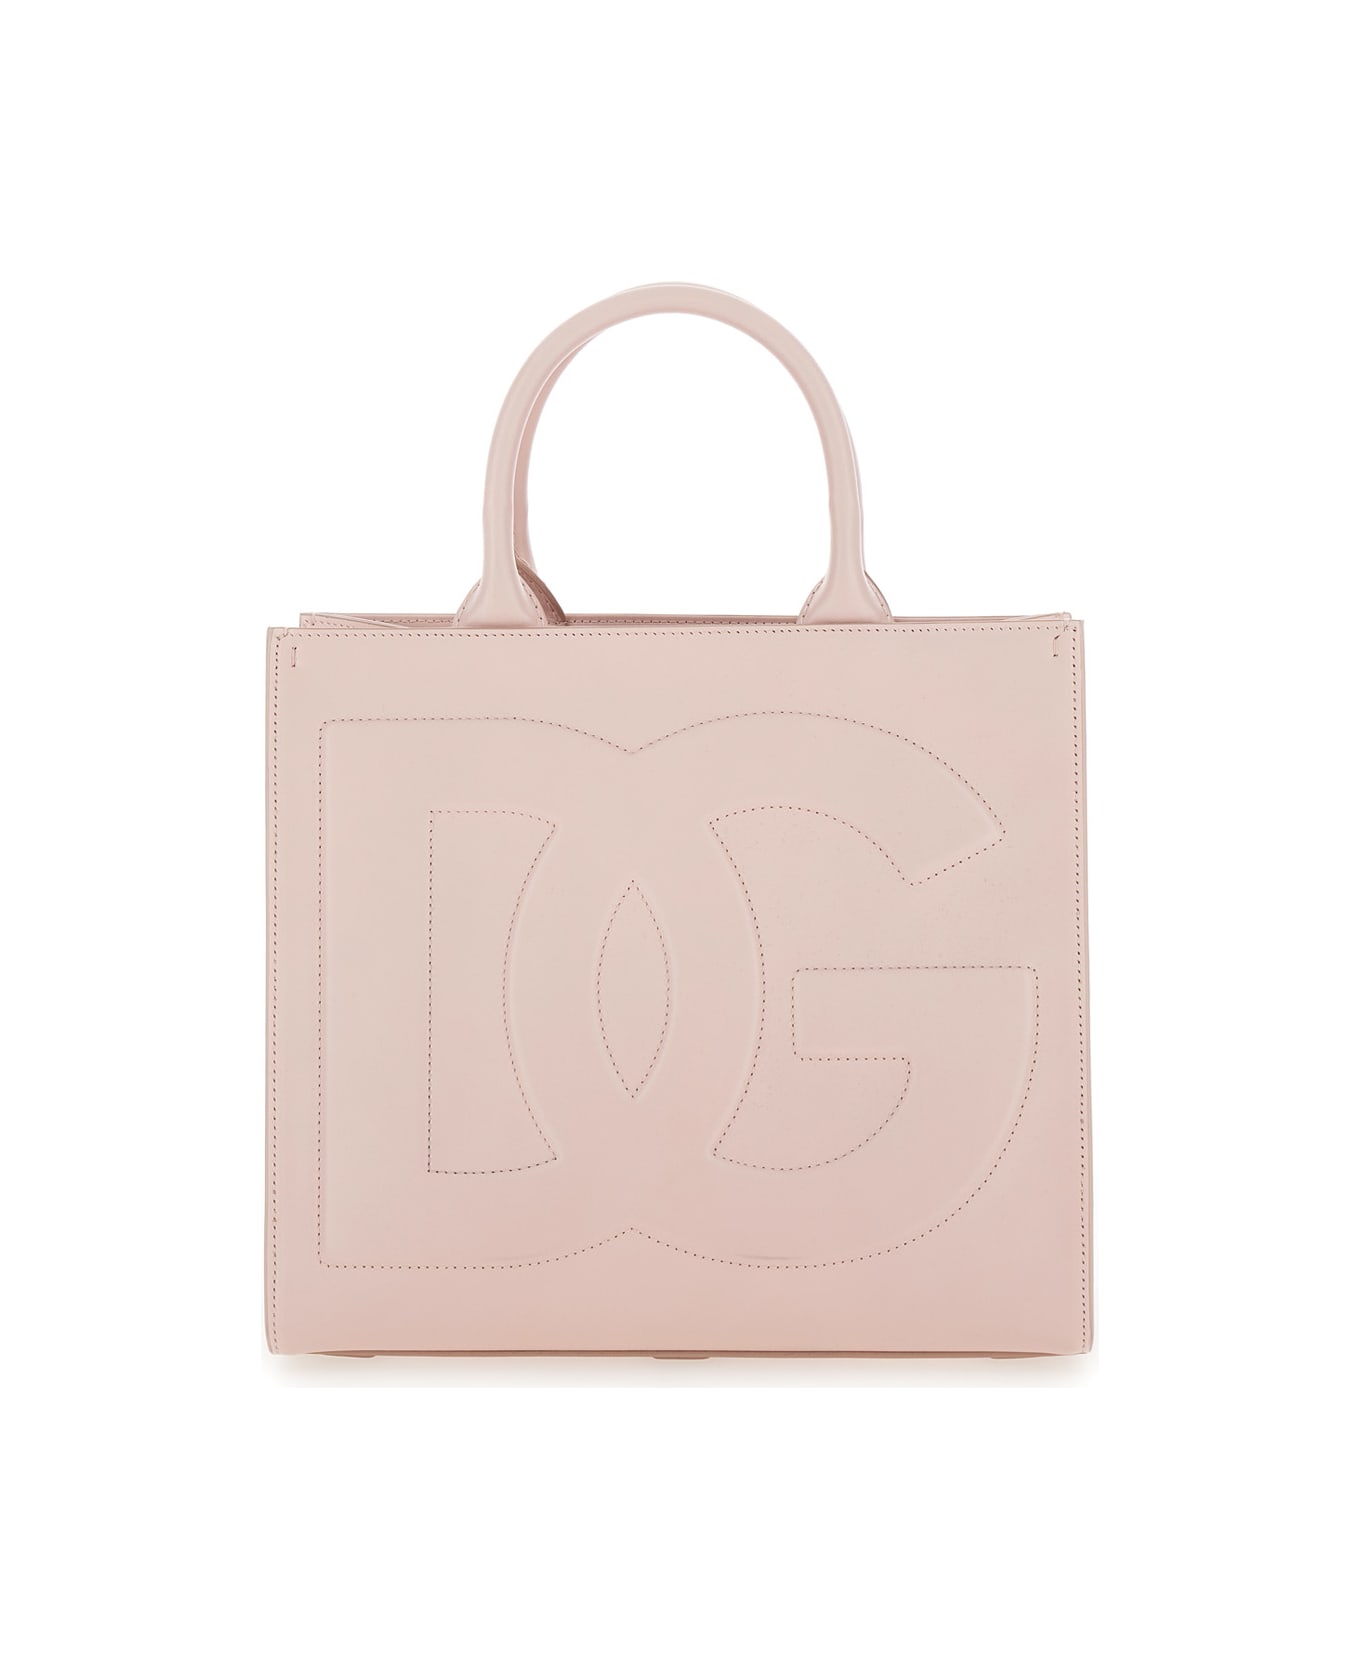 Dolce & Gabbana 'dg Daily' Pink Handbag With Dg Embroidery In Smooth Leather Woman - Pink